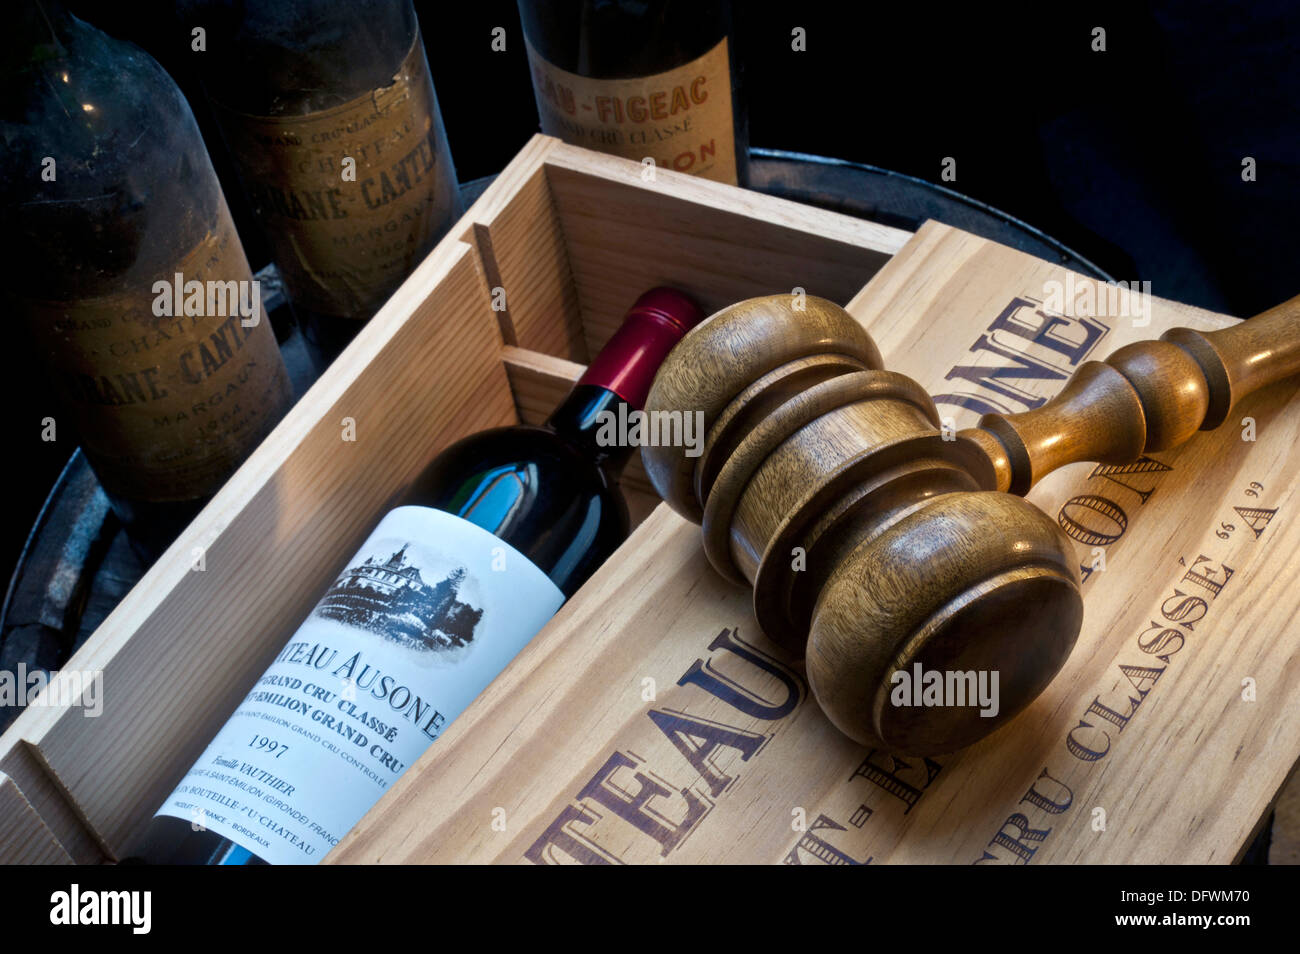 Wine auction cellar with gavel on open case of Chateau Ausone Saint-Émilion red wine and other old fine red Bordeaux wine bottles behind France Stock Photo